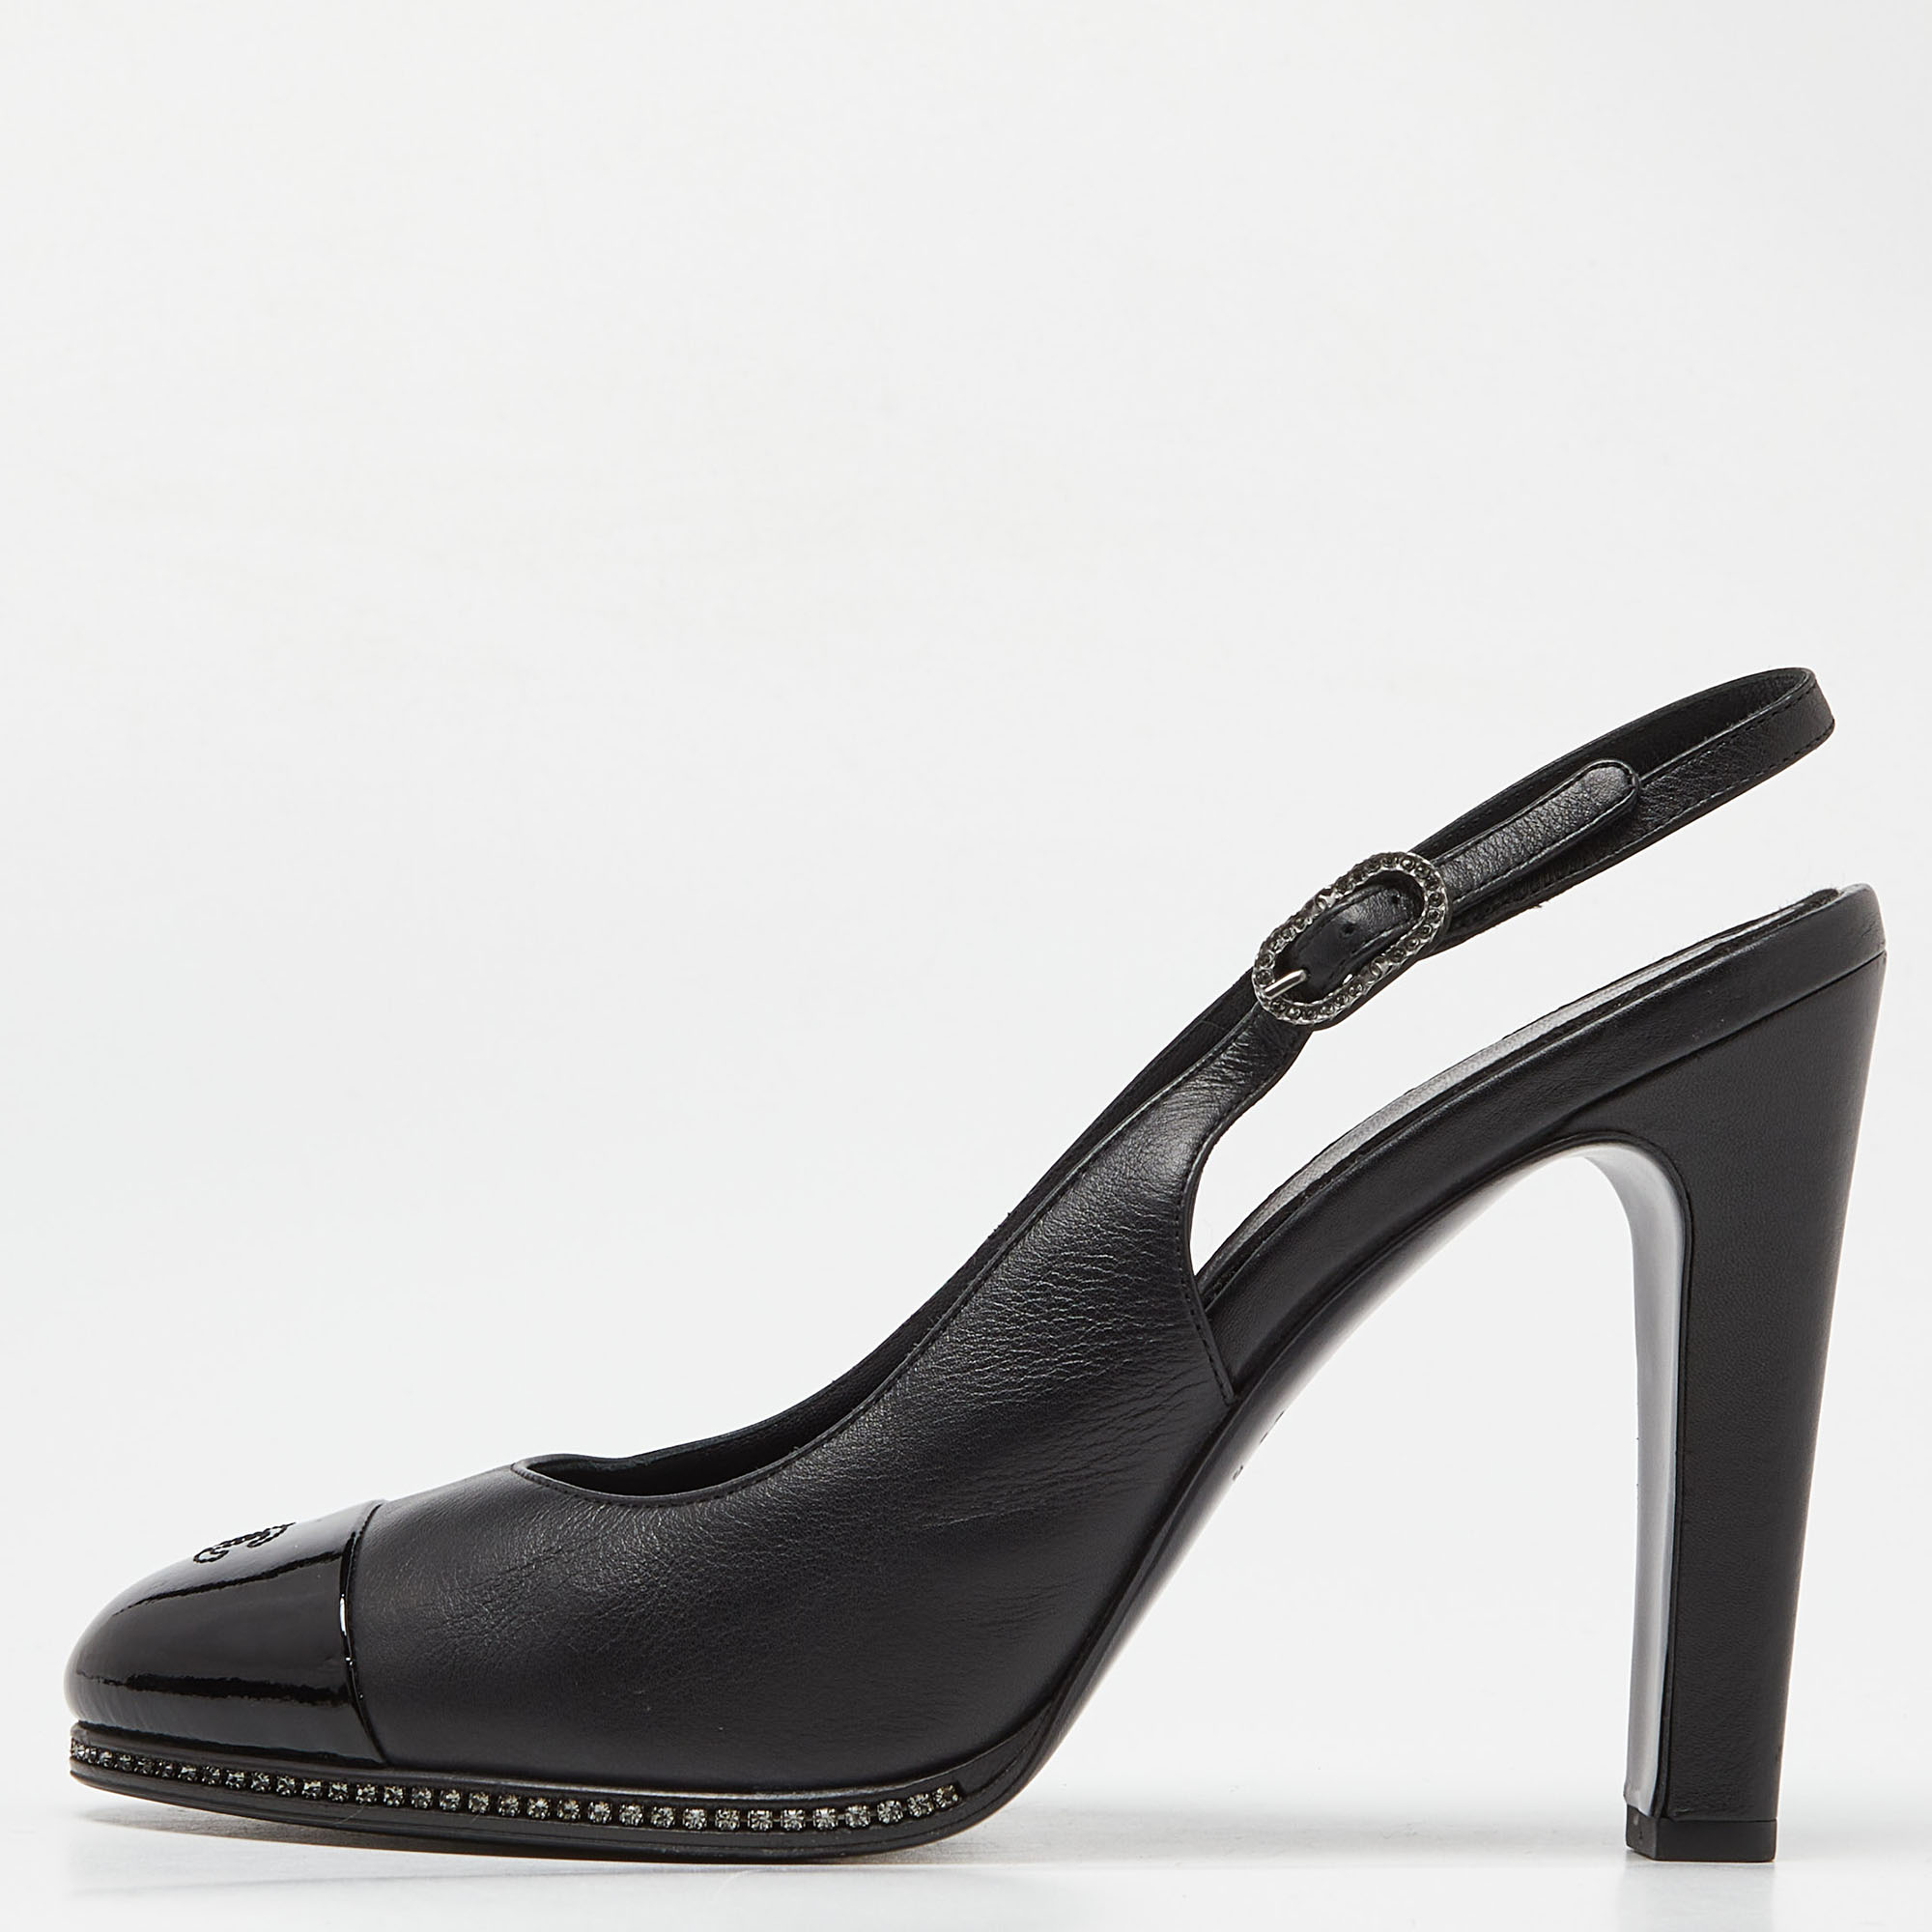 Curvaceous arches a feminine appeal and a well built structure define this set of designer pumps. Coming with comfortable insoles and sleek heels style them with your favorite outfits.